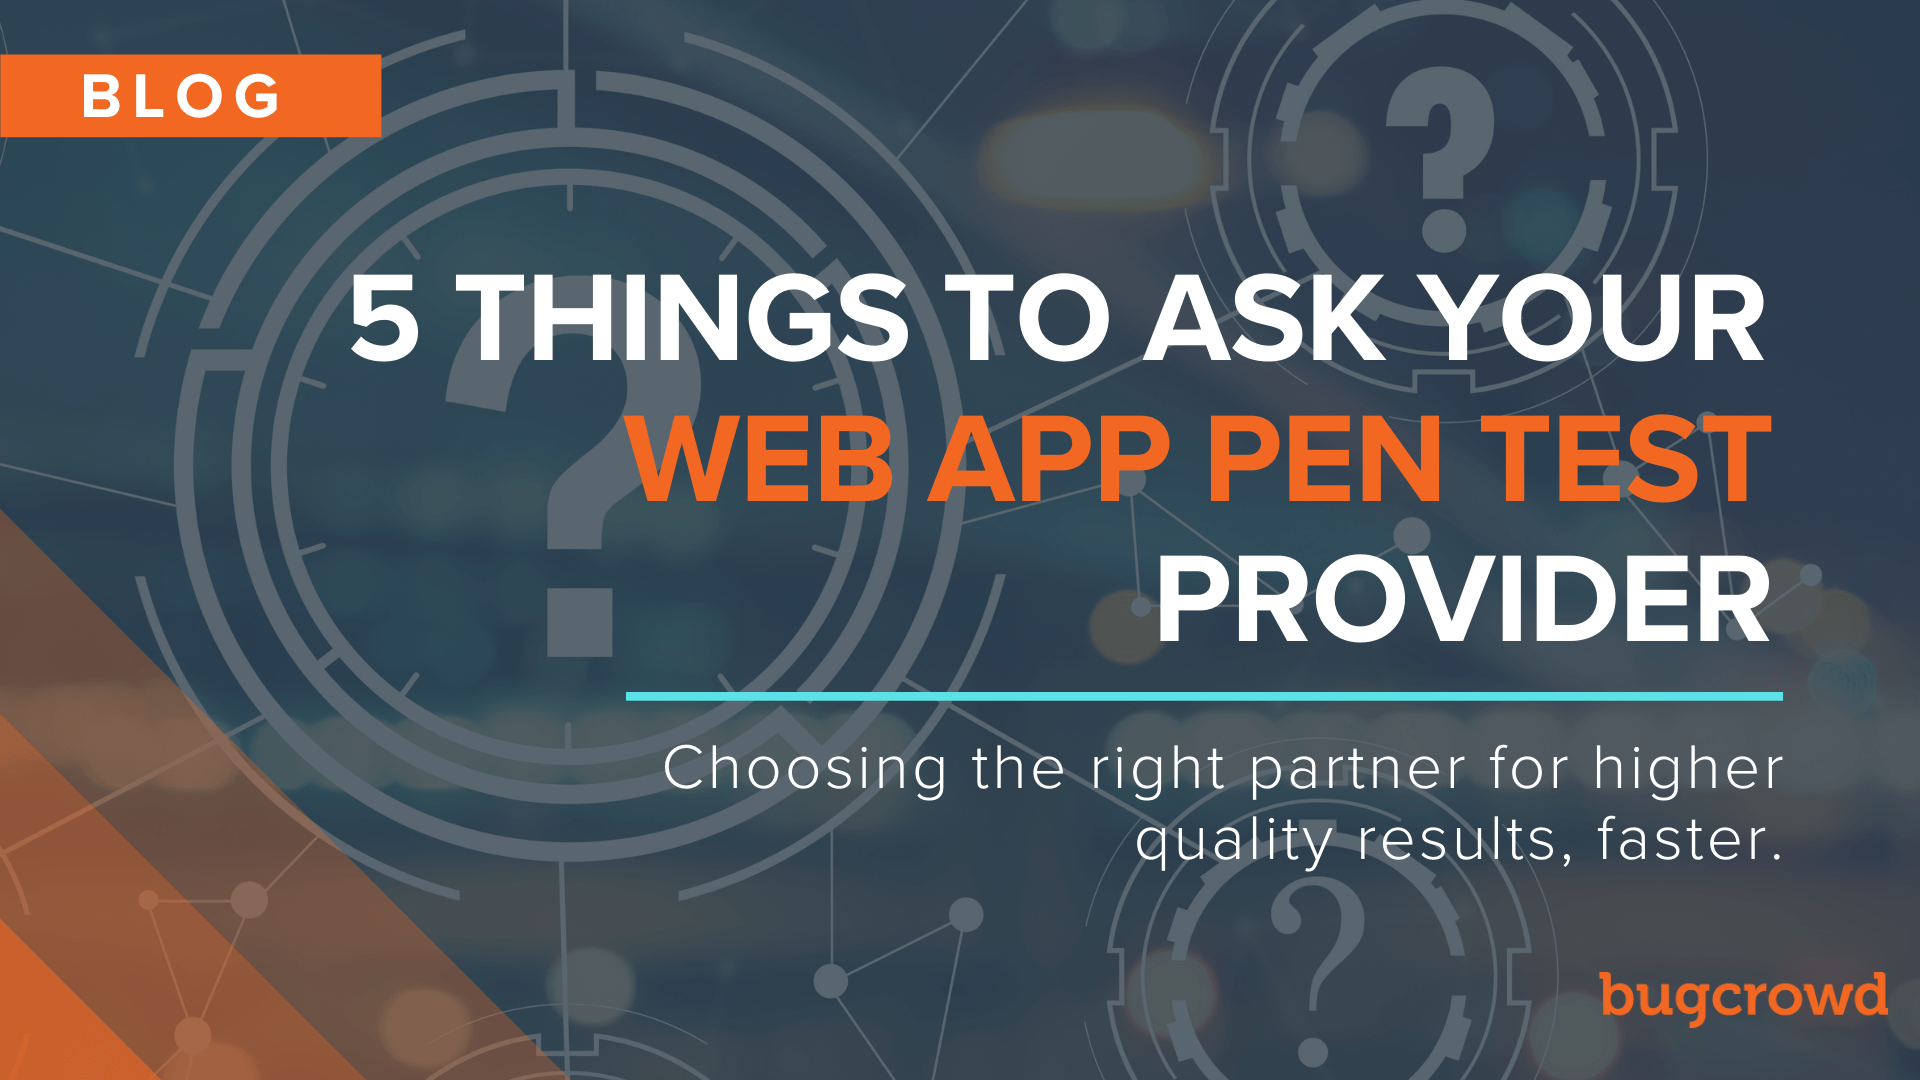 5 Things to Ask Your Web App Pen Test Provider